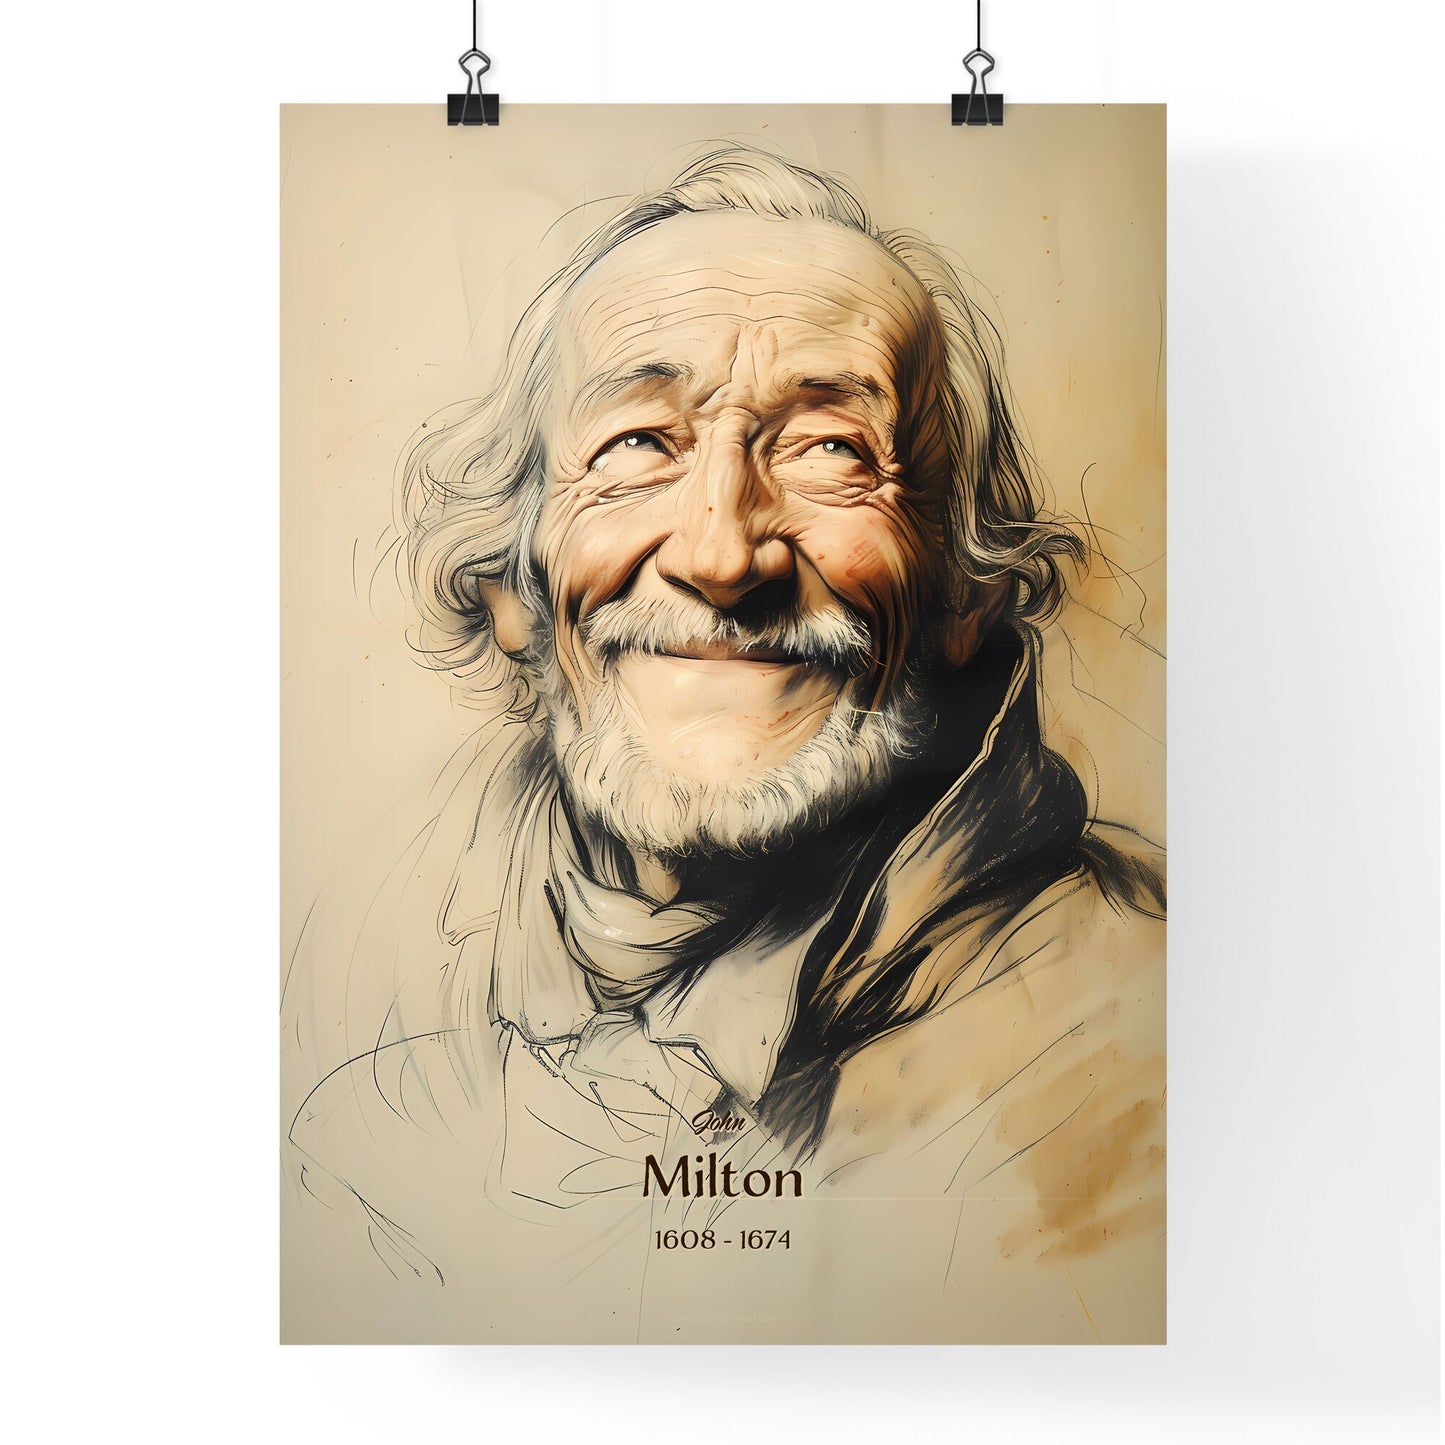 John, Milton, 1608 - 1674, A Poster of a drawing of a man smiling Default Title